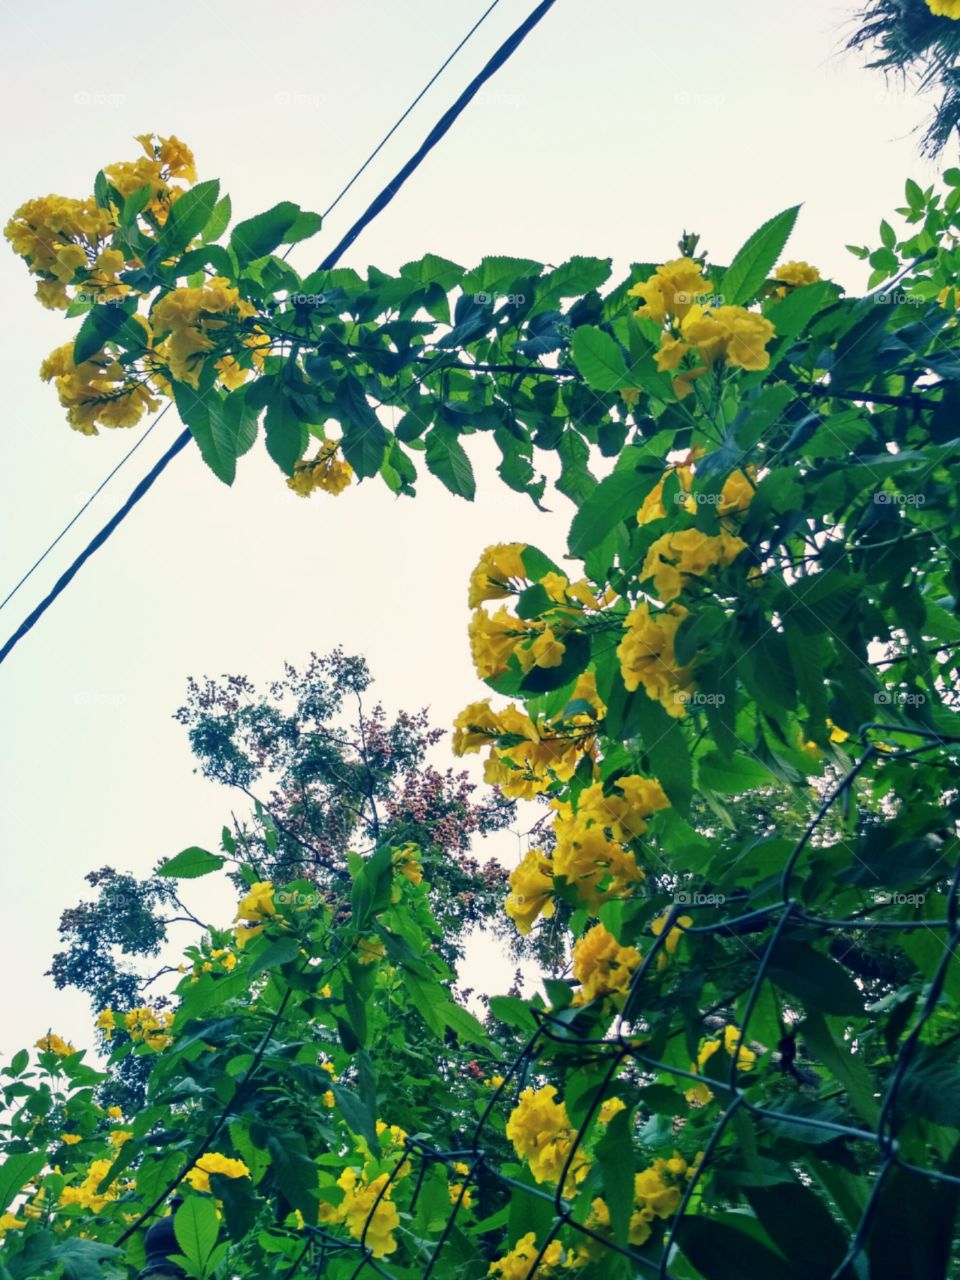 the beautiful yellow bell flowers & climbers !!